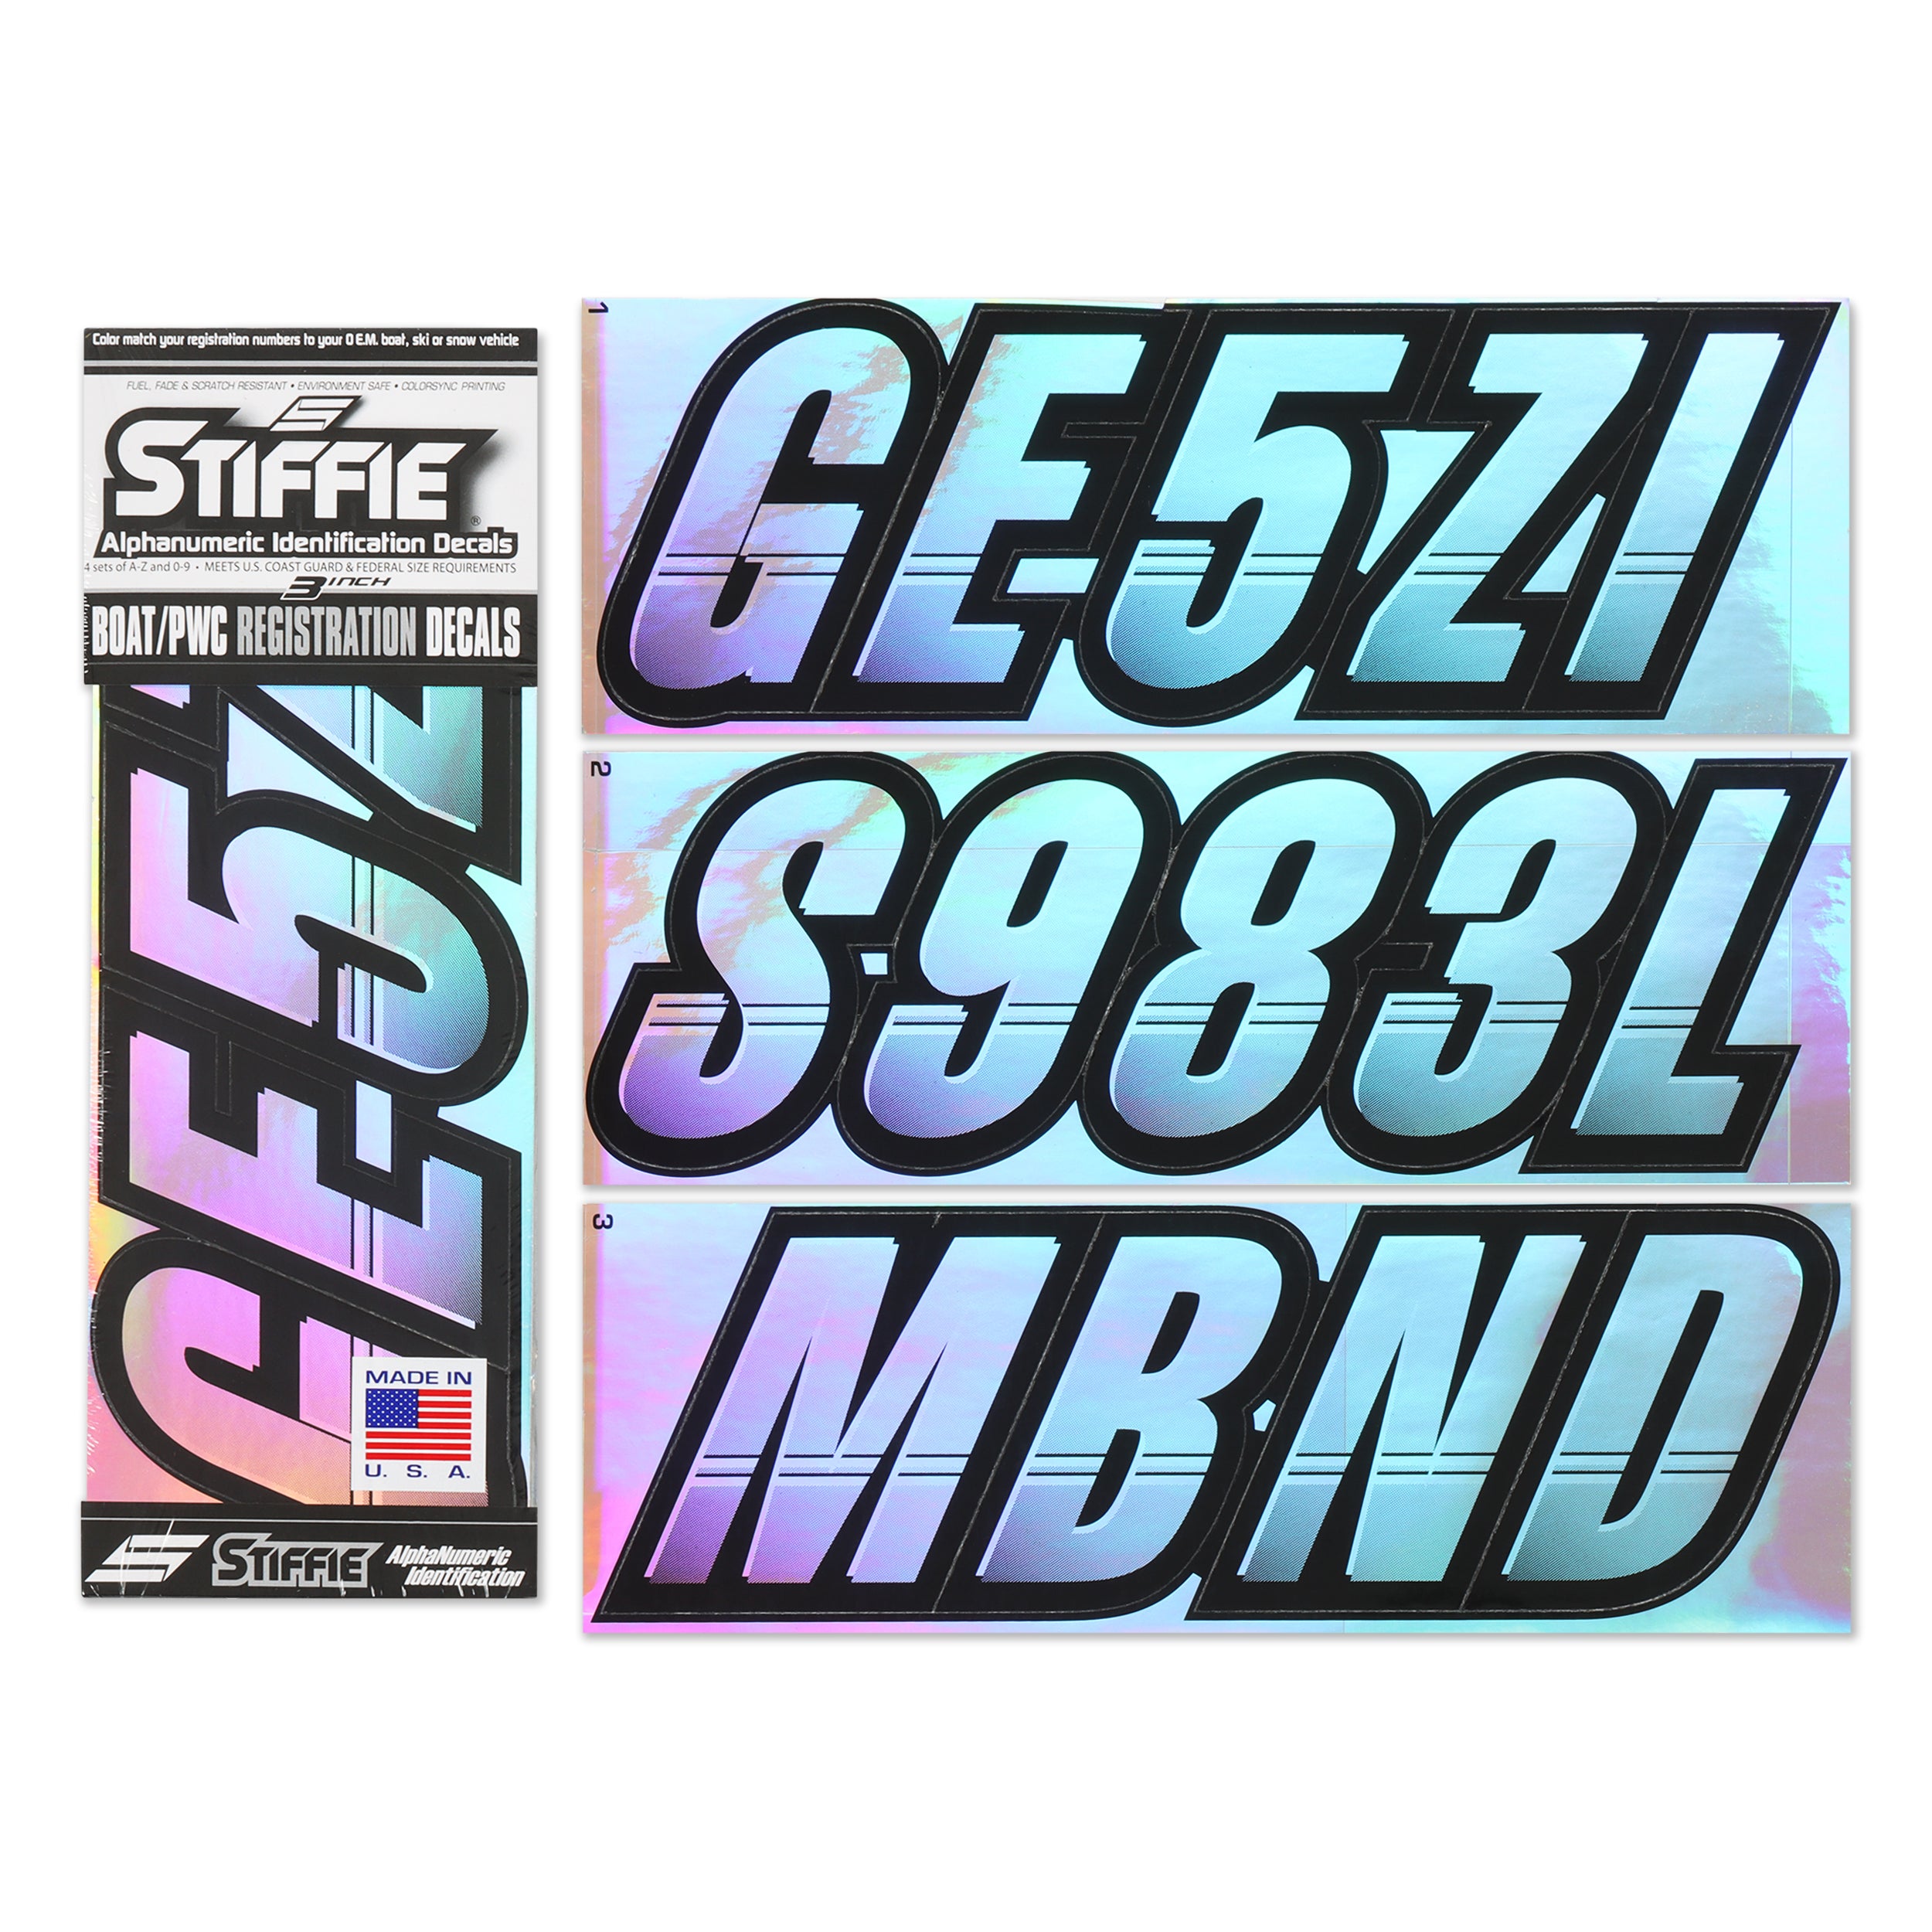 STIFFIE Techtron Chrome/Black 3" Alpha-Numeric Registration Identification Numbers Stickers Decals for Boats & Personal Watercraft